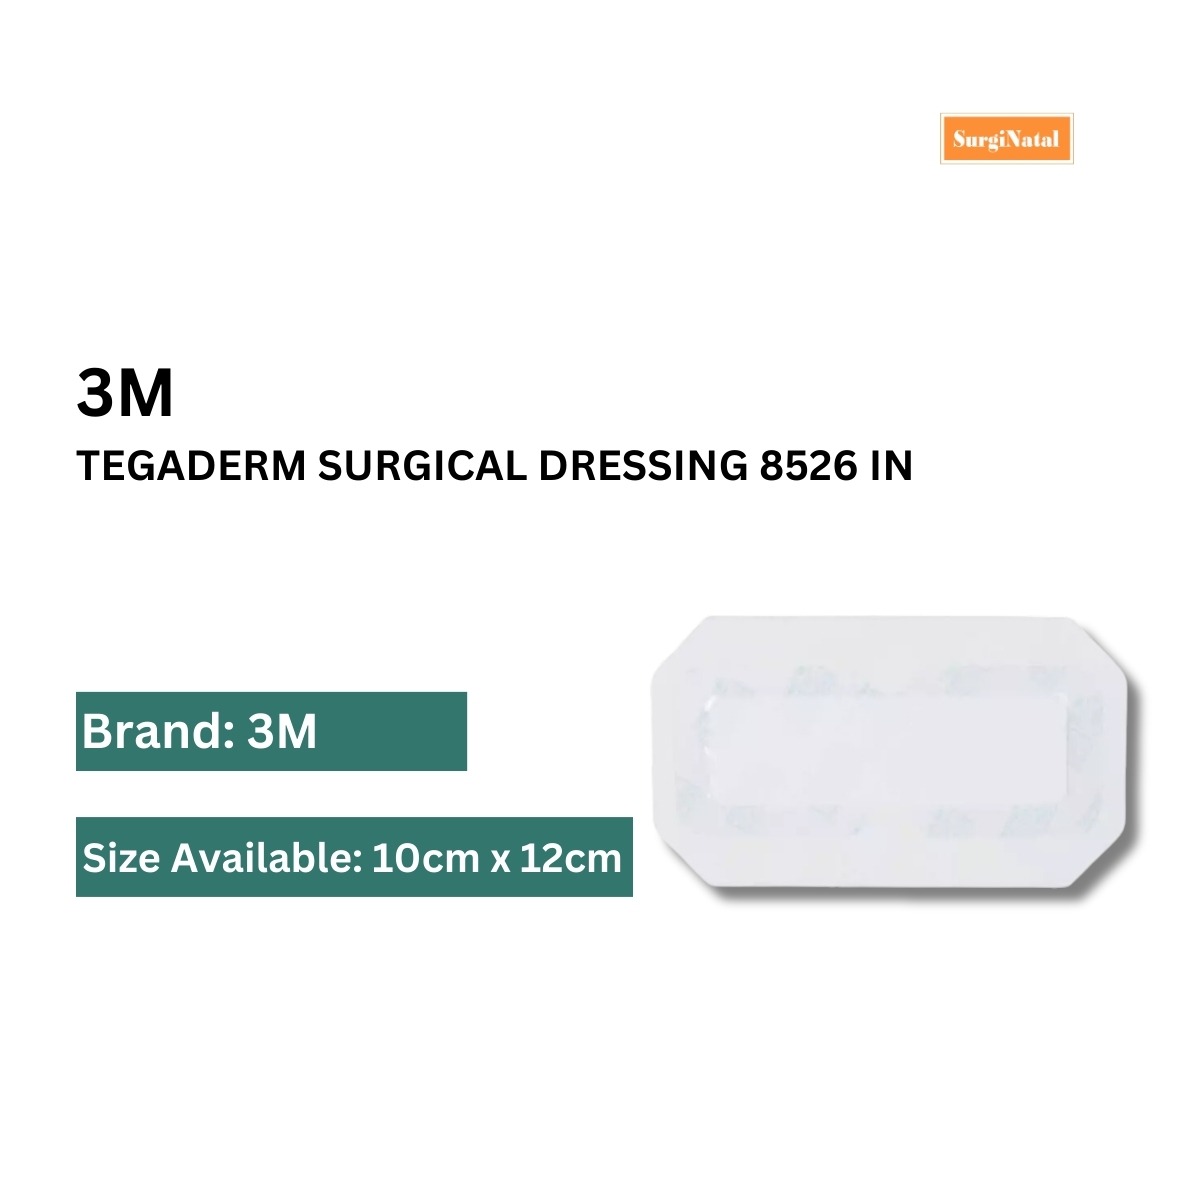  tegaderm surgical dressings